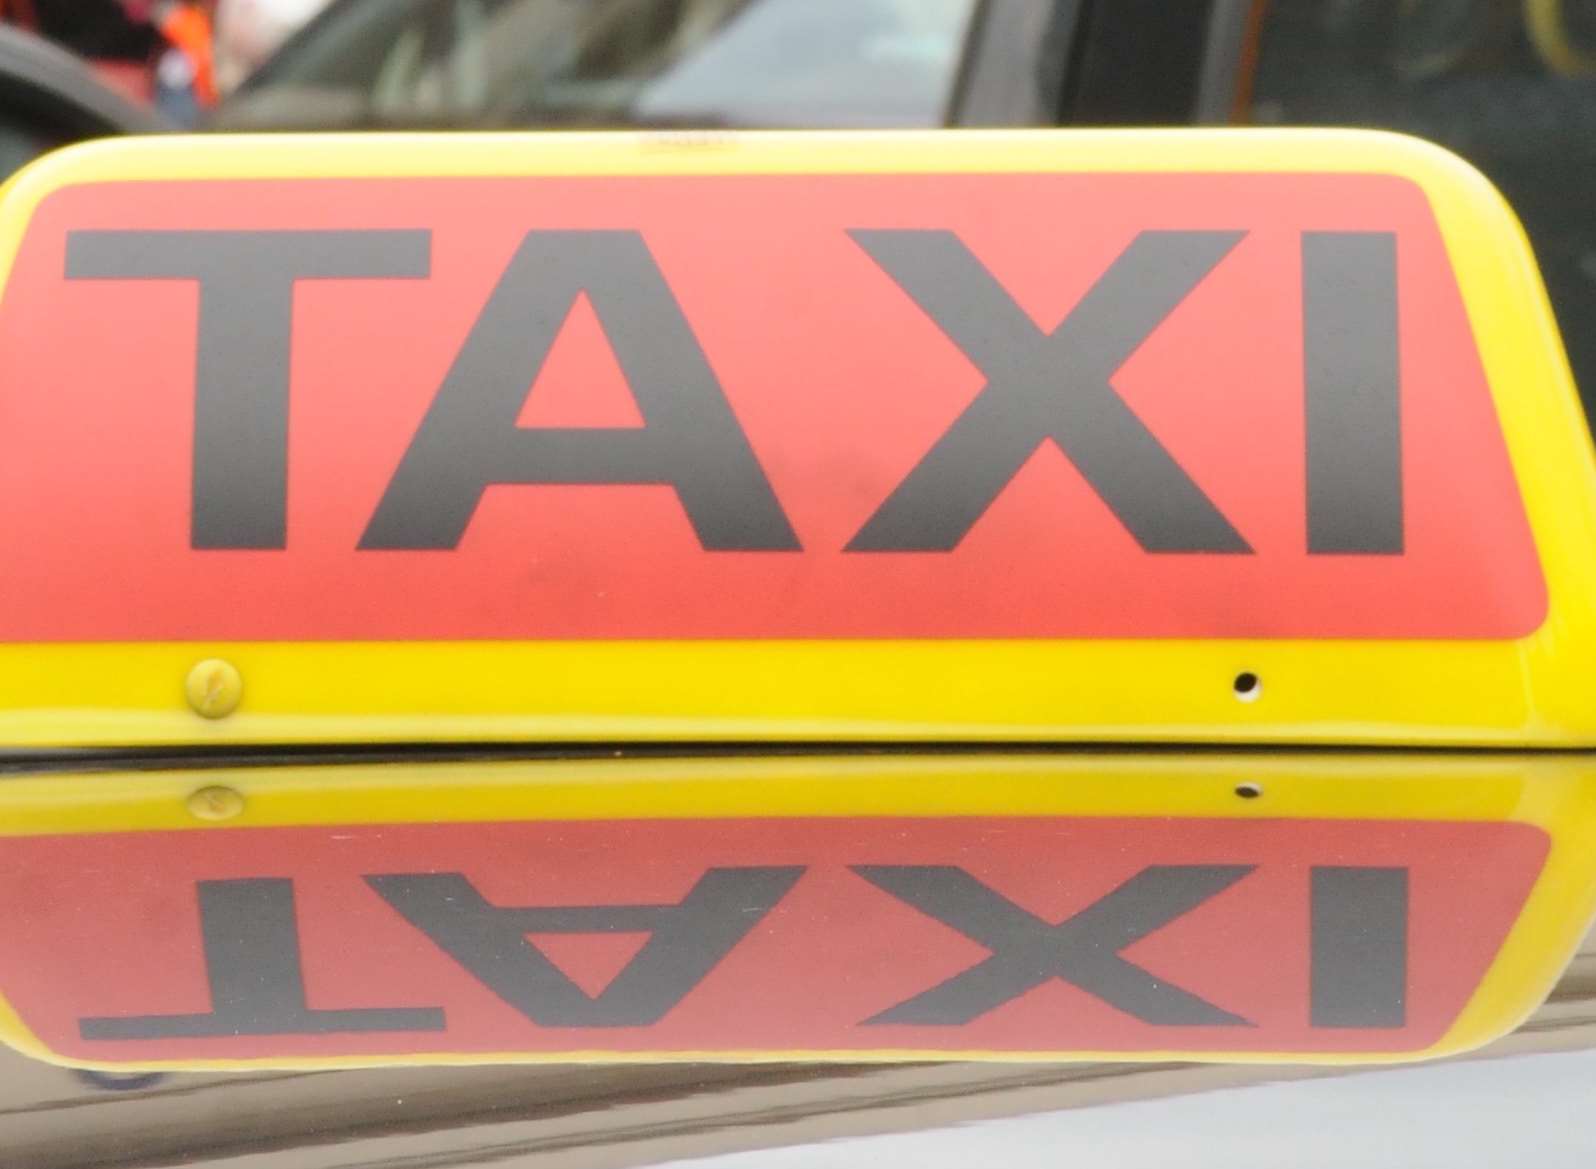 A taxi was used by crooks who conned a woman out of £4,000 in Sittingbourne